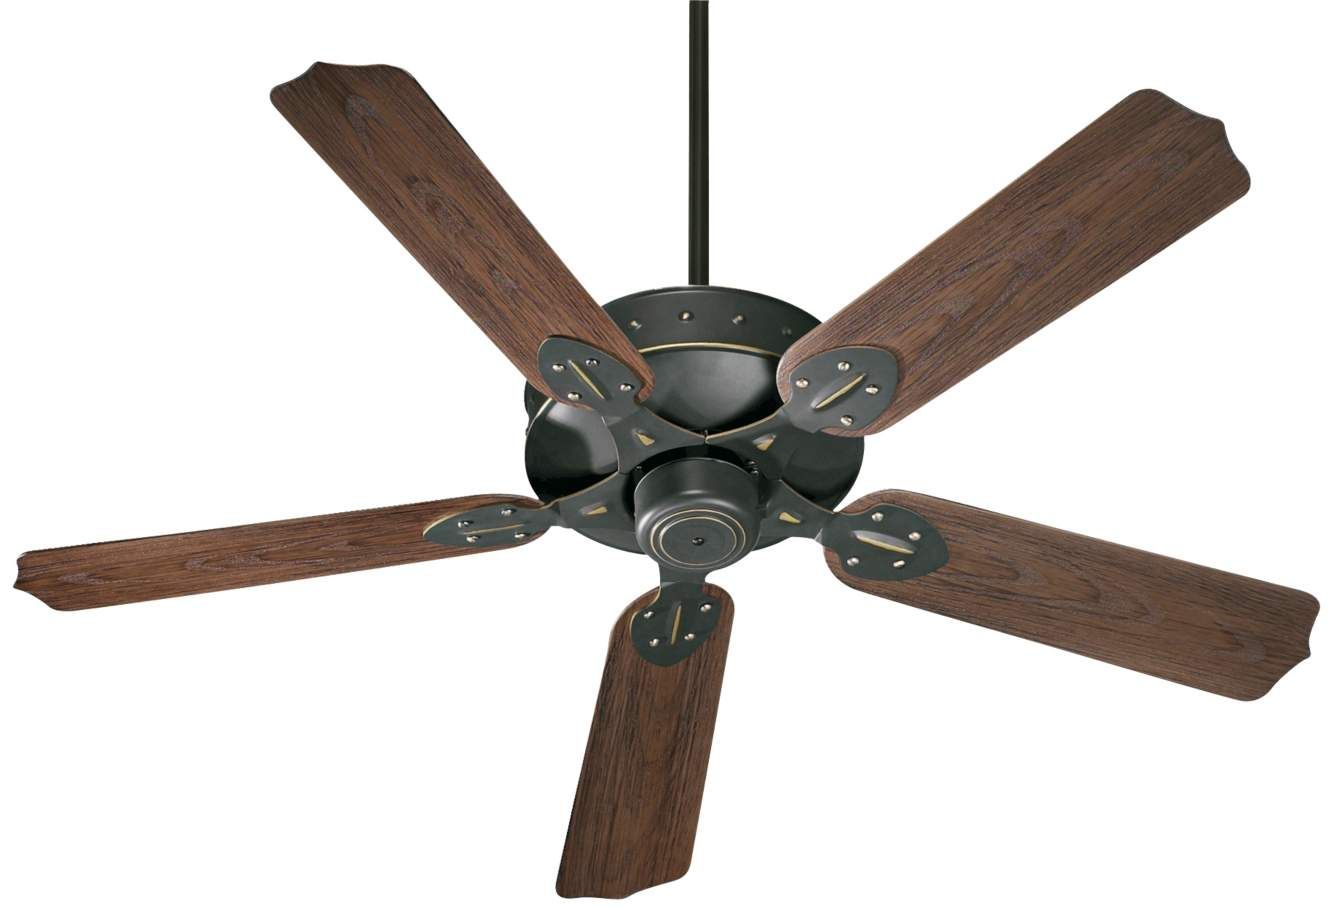 Home / Lodge and Cabin Ceiling Fans / Hudson Outdoor Ceiling Fan